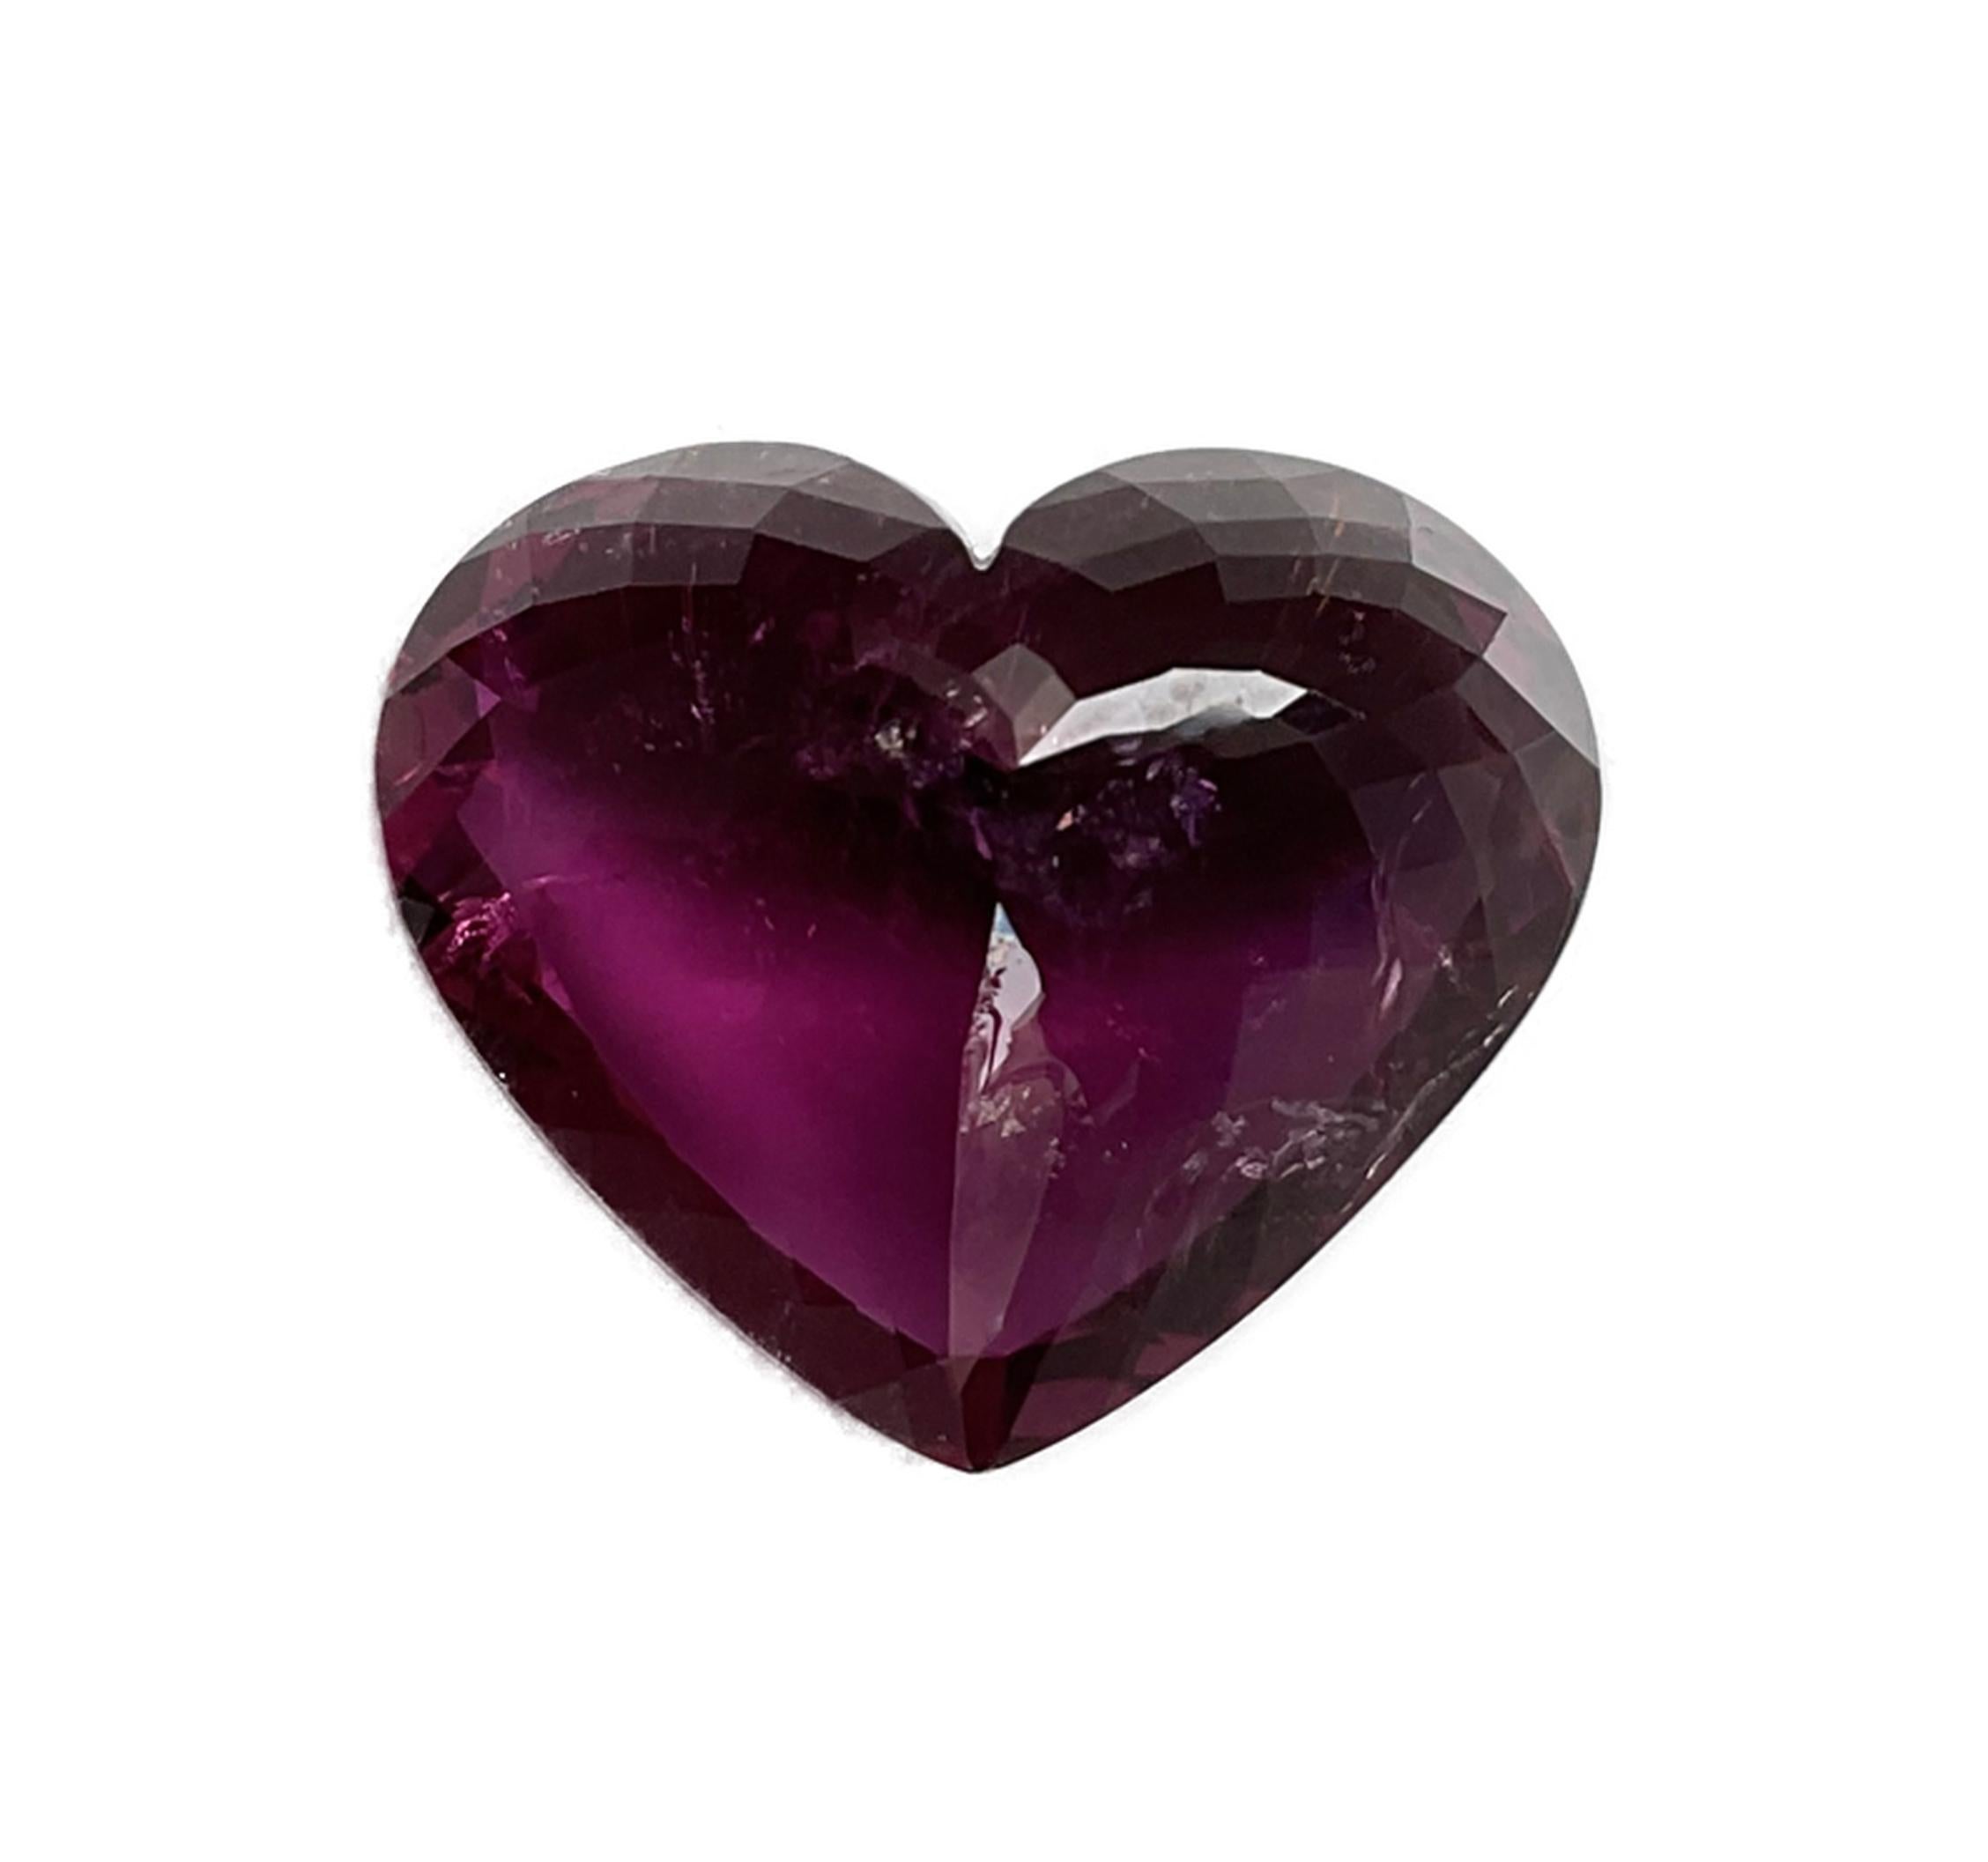 This Heart shape tourmaline can be called as Paraiba tourmaline as it contains both manganese and copper, can be heated to blue color but we prefer to sell it as it is in the natural state.